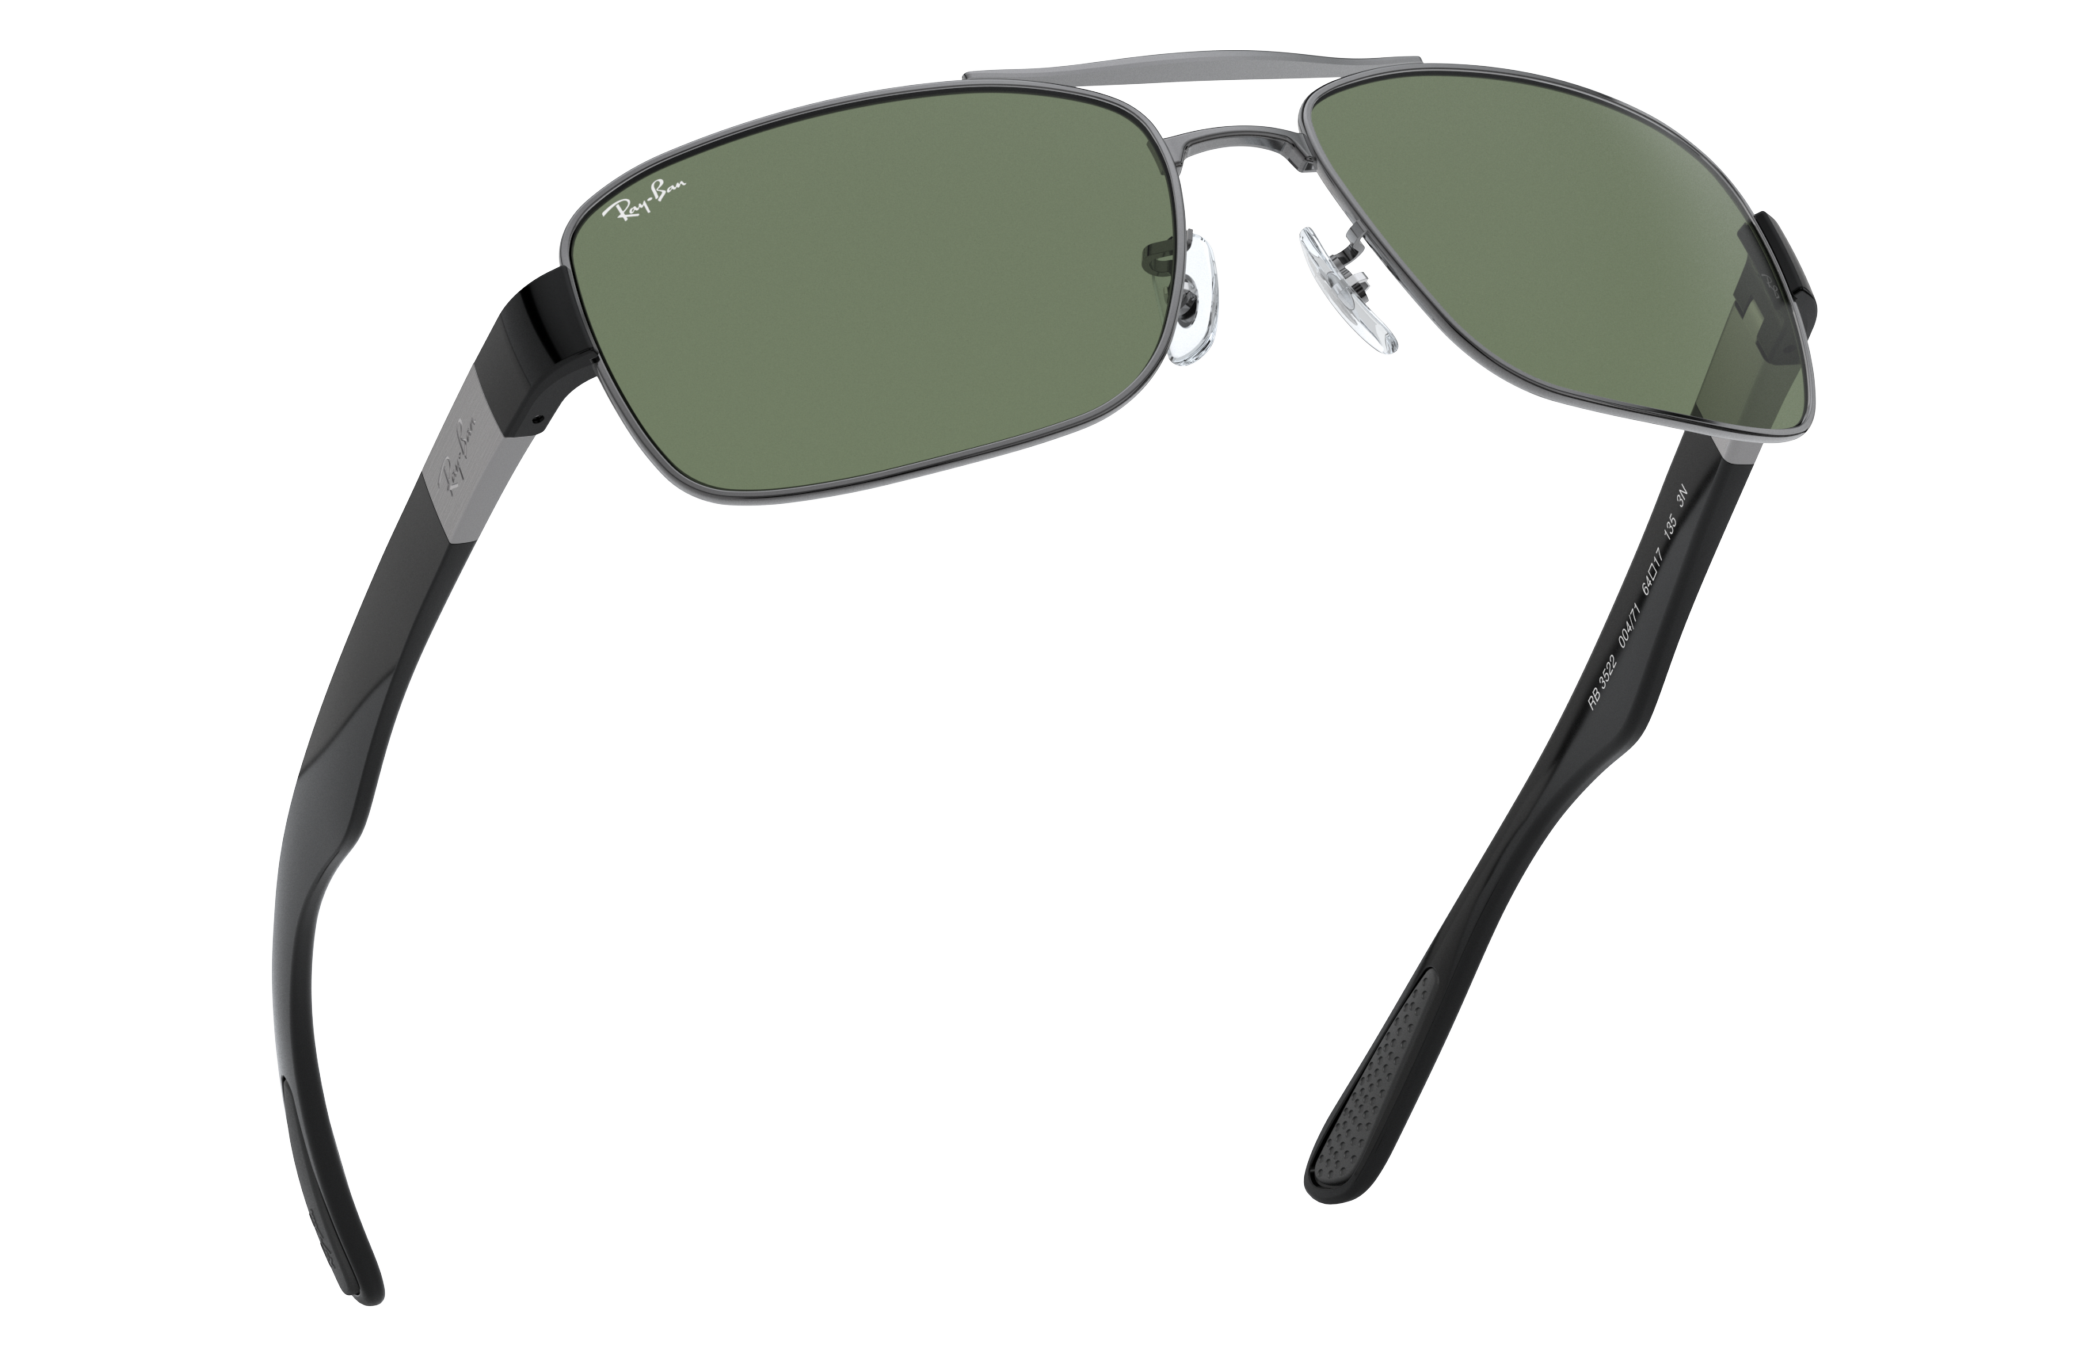 Rb3522 Sunglasses in Gunmetal and Green - RB3522 | Ray-Ban® US